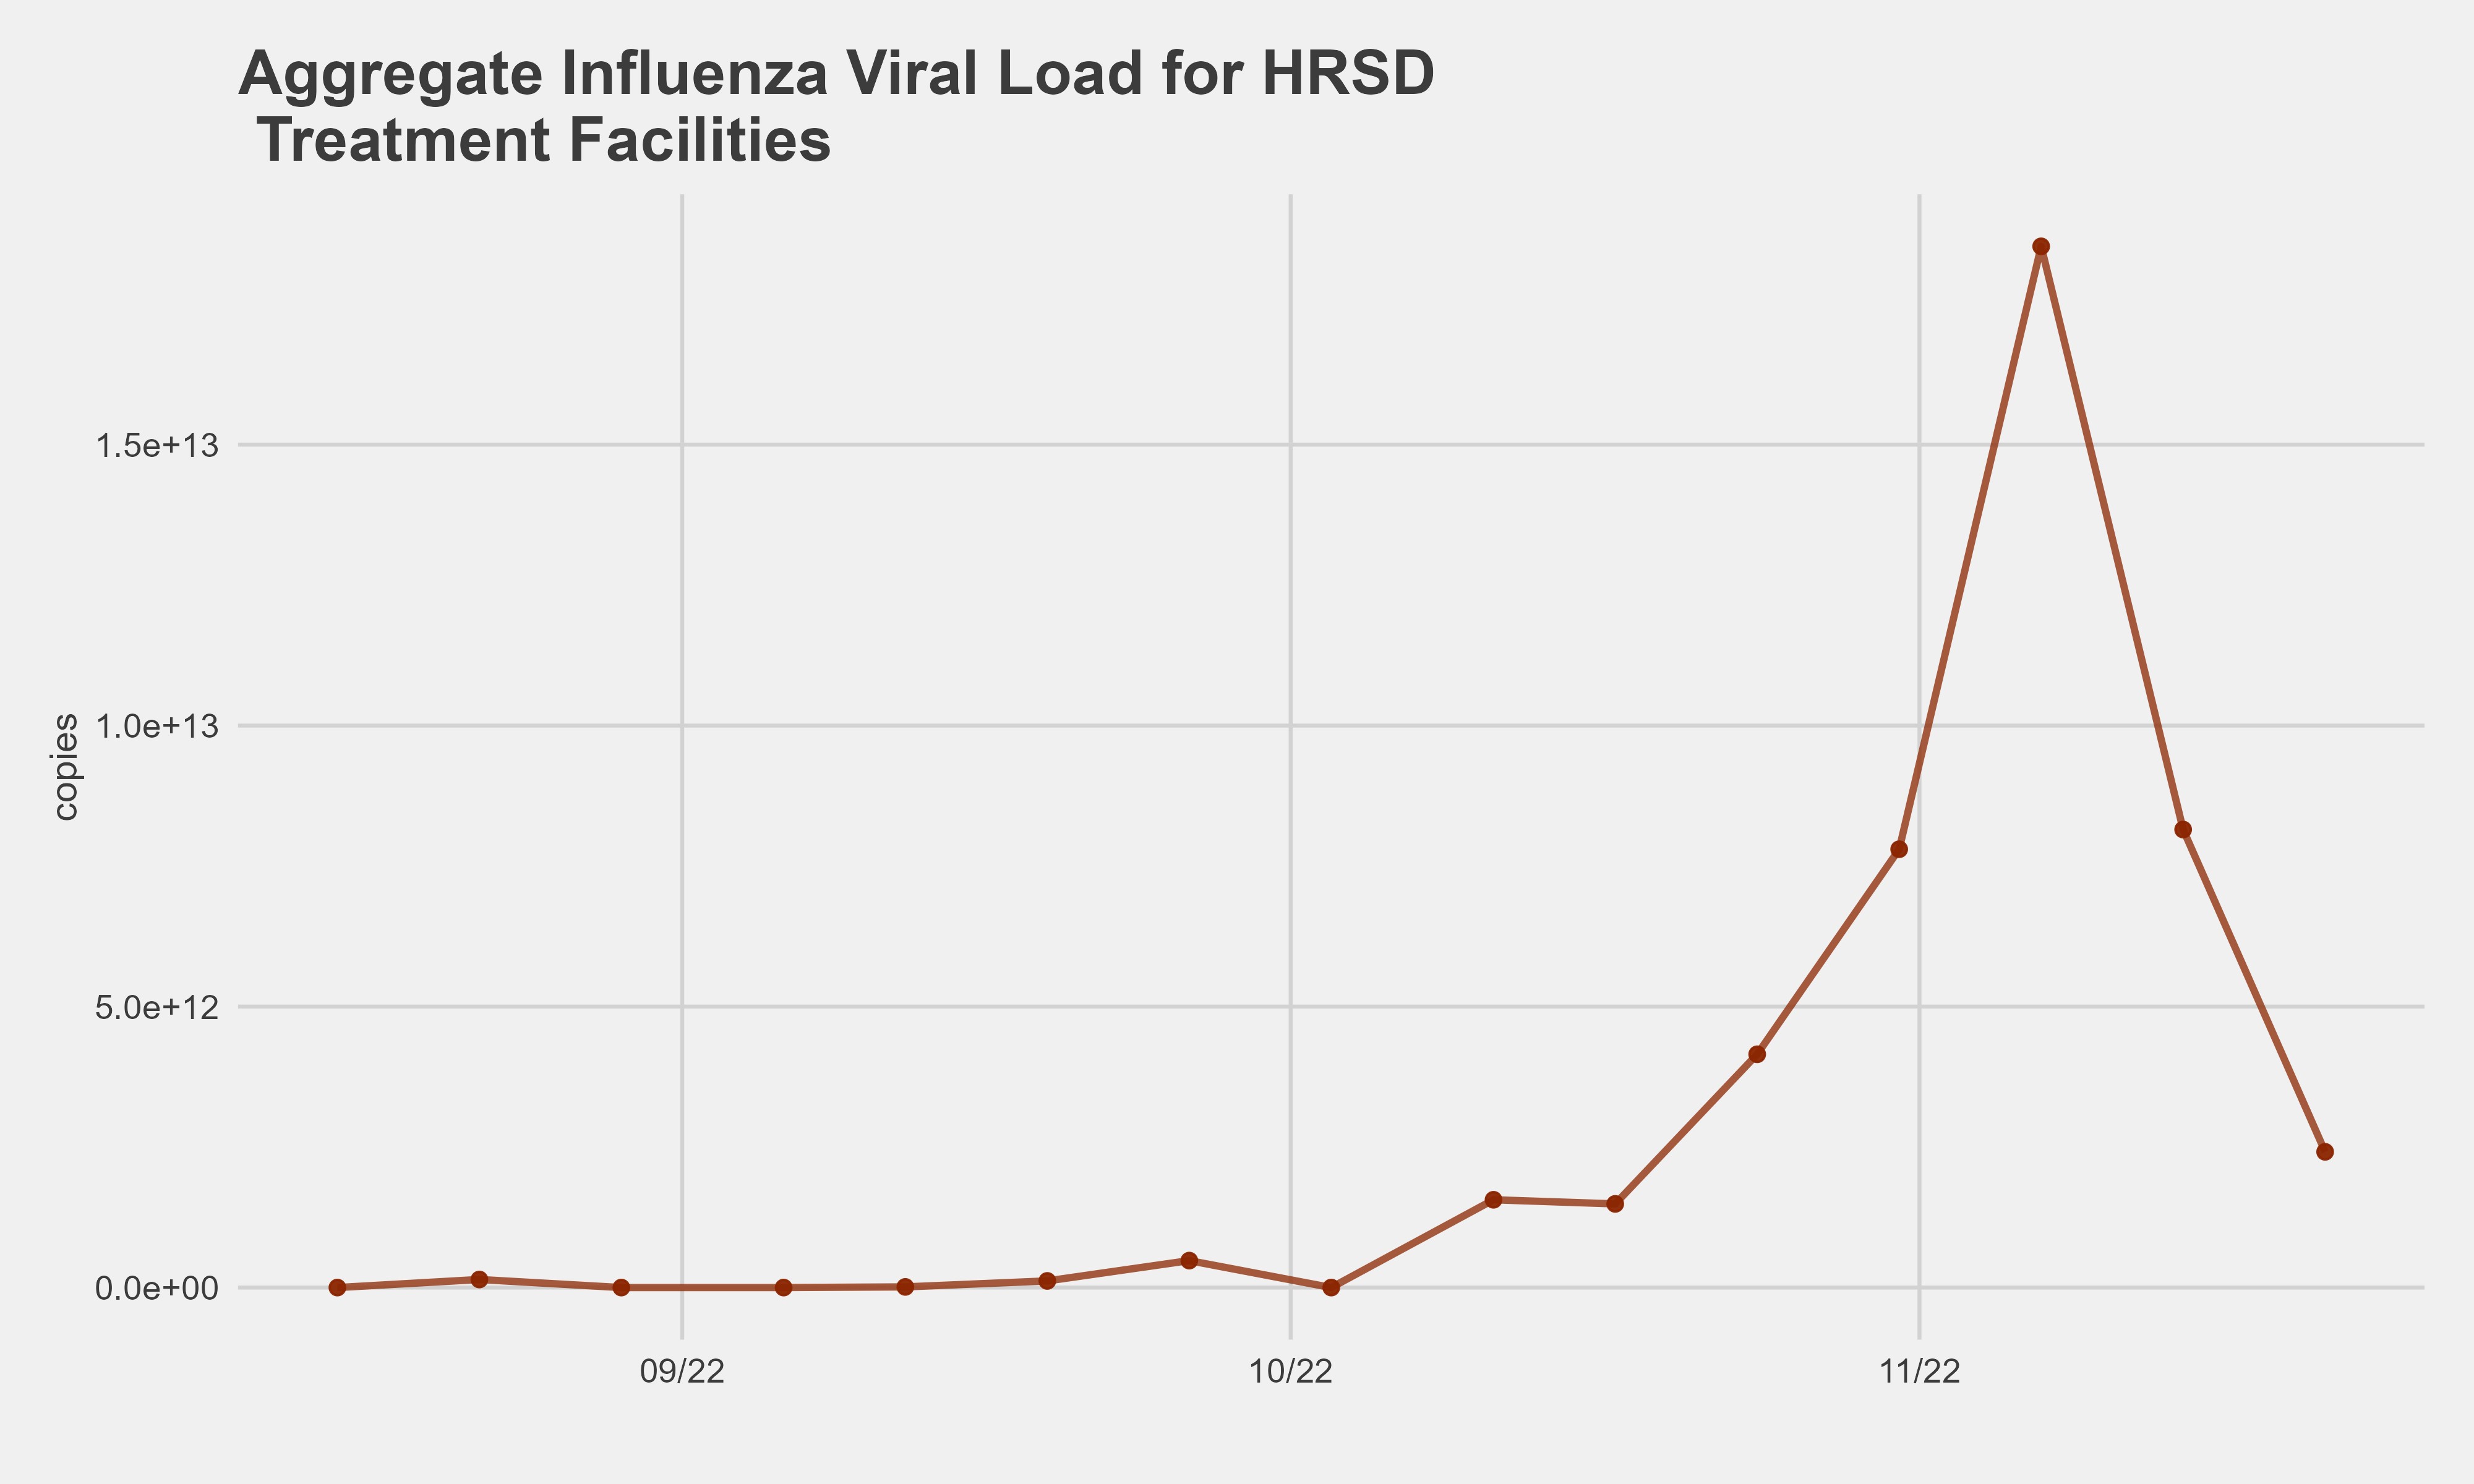 Daily New Clinical Cases and Viral Load in HRSD Treatment Facilities